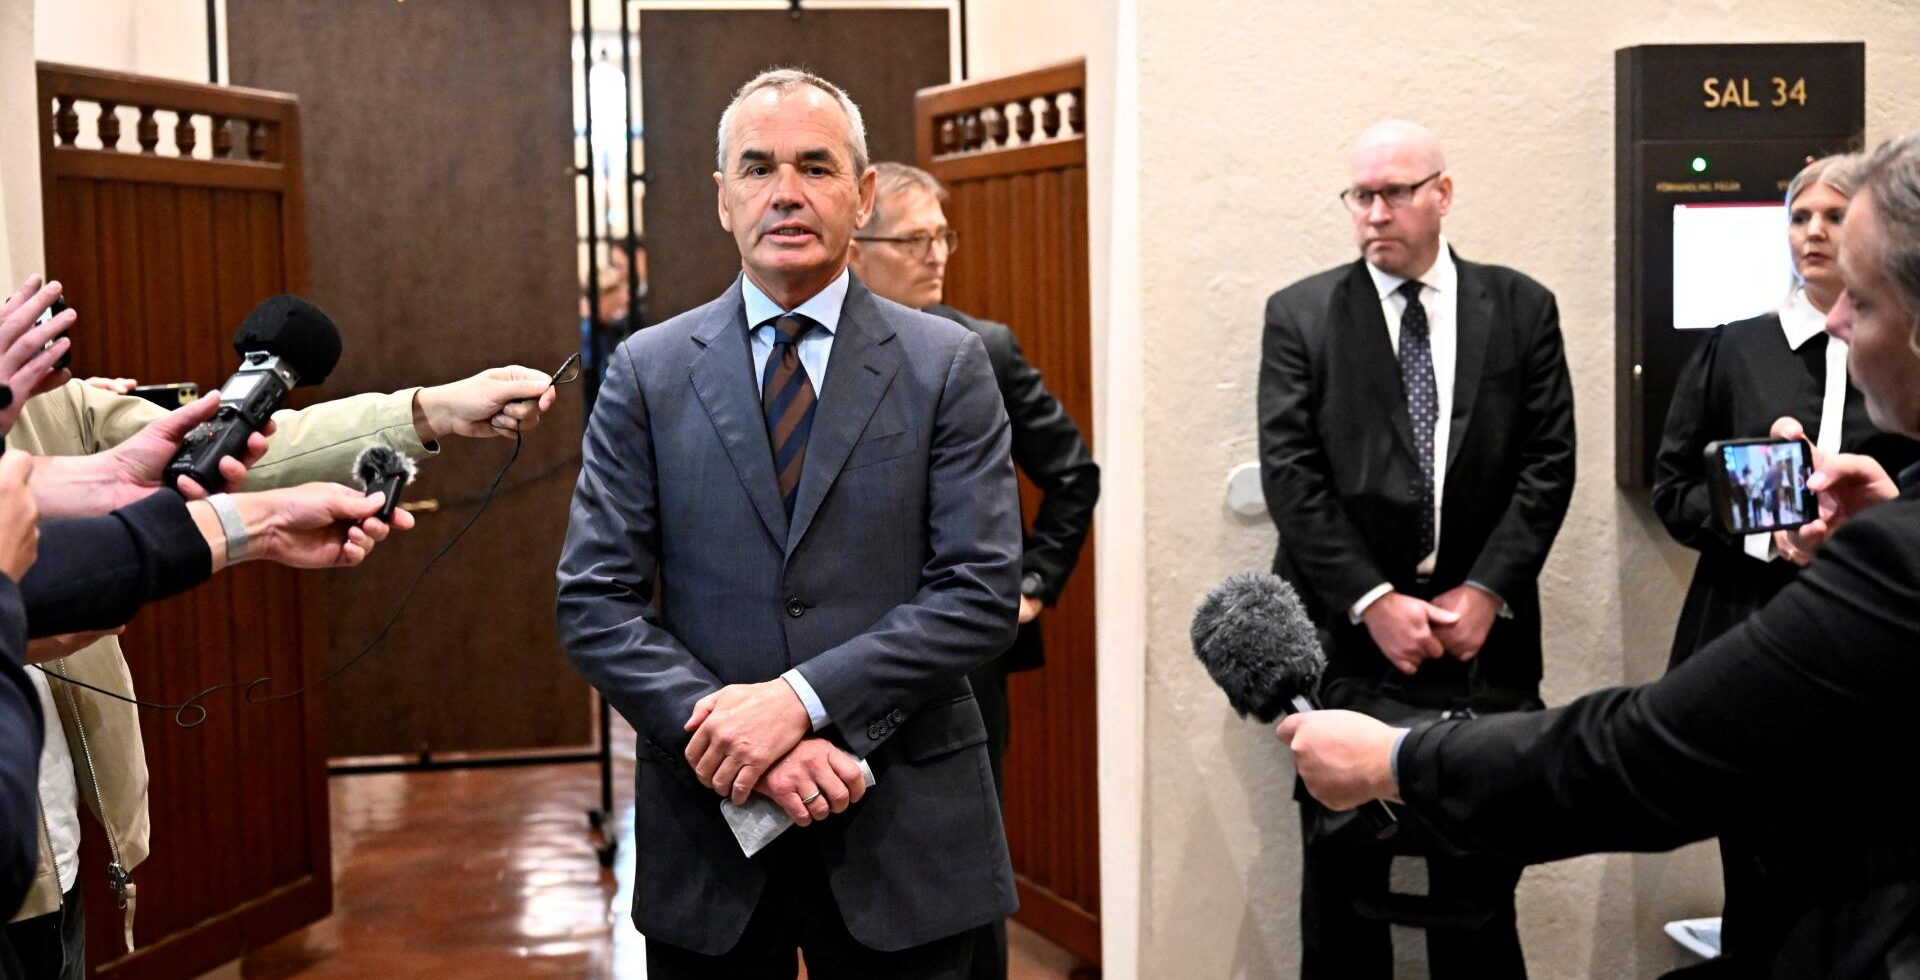 Former Lundin Oil chairmanIan Lundin arrives in court in Stockholm. He and ex-Lundin executive Alex Schneiter are charged with aiding and abetting serious violations of international law in Sudan (Reuters)